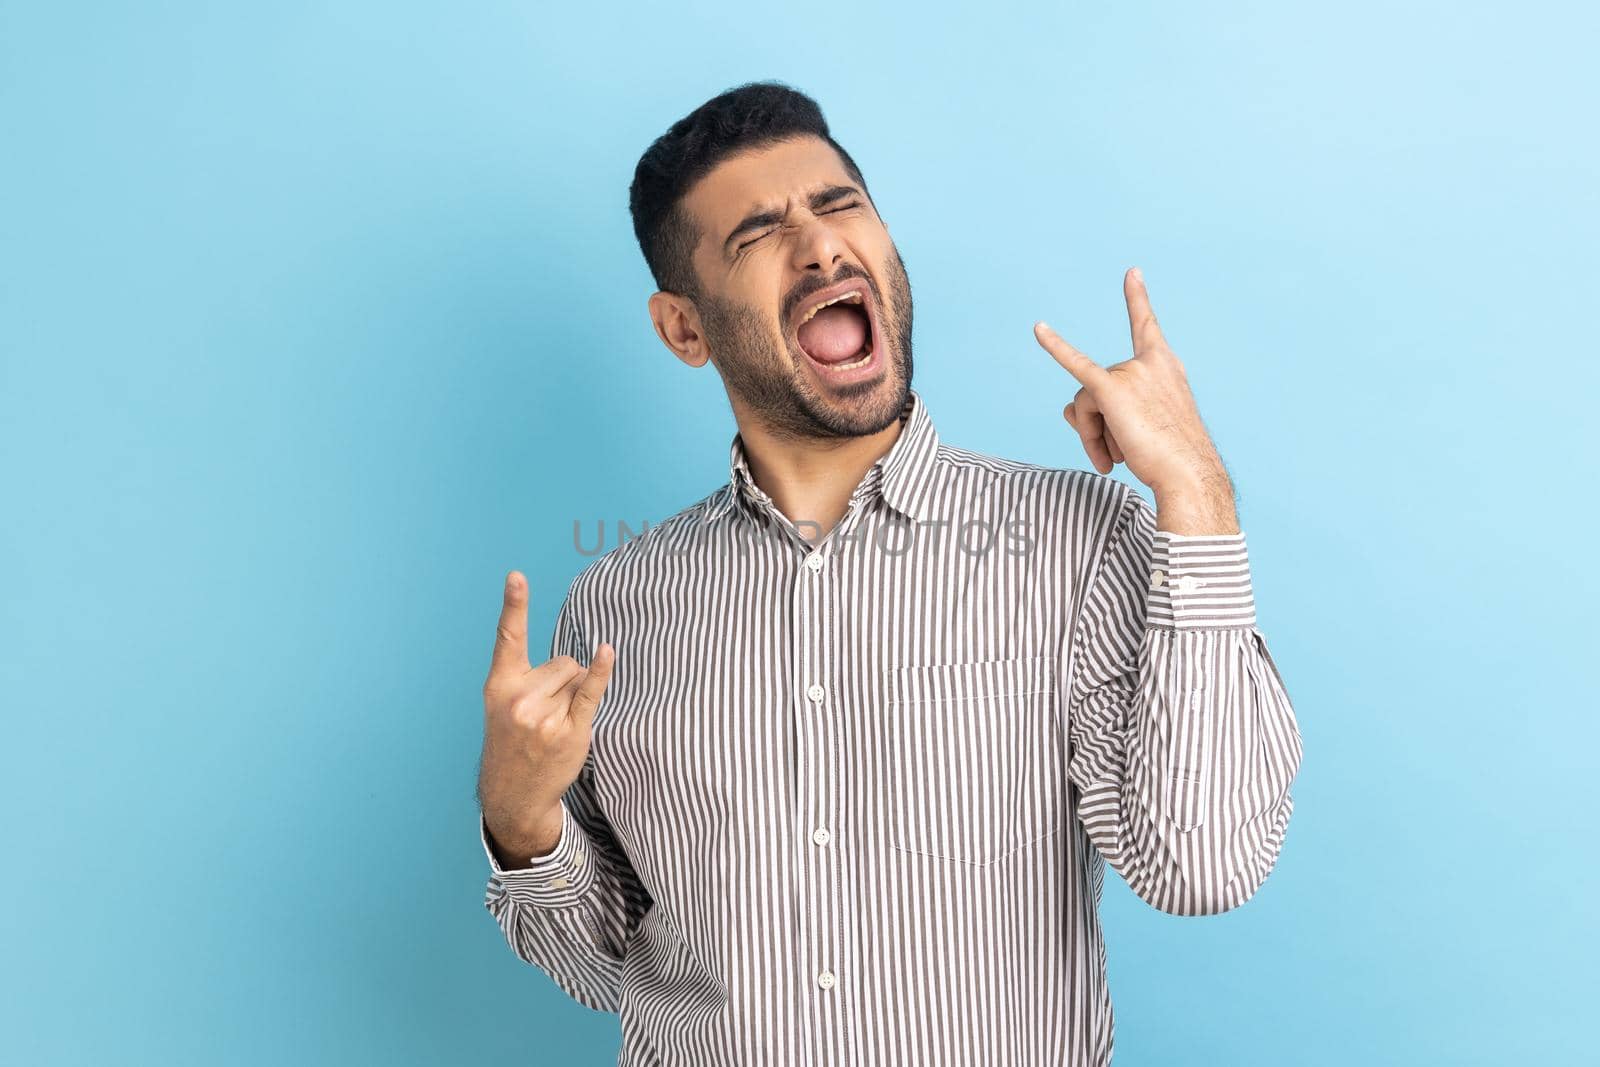 Disobedient businessman with beard showing rock and roll gesture and excitedly screaming, having fun, enjoying heavy music, wearing striped shirt. Indoor studio shot isolated on blue background.